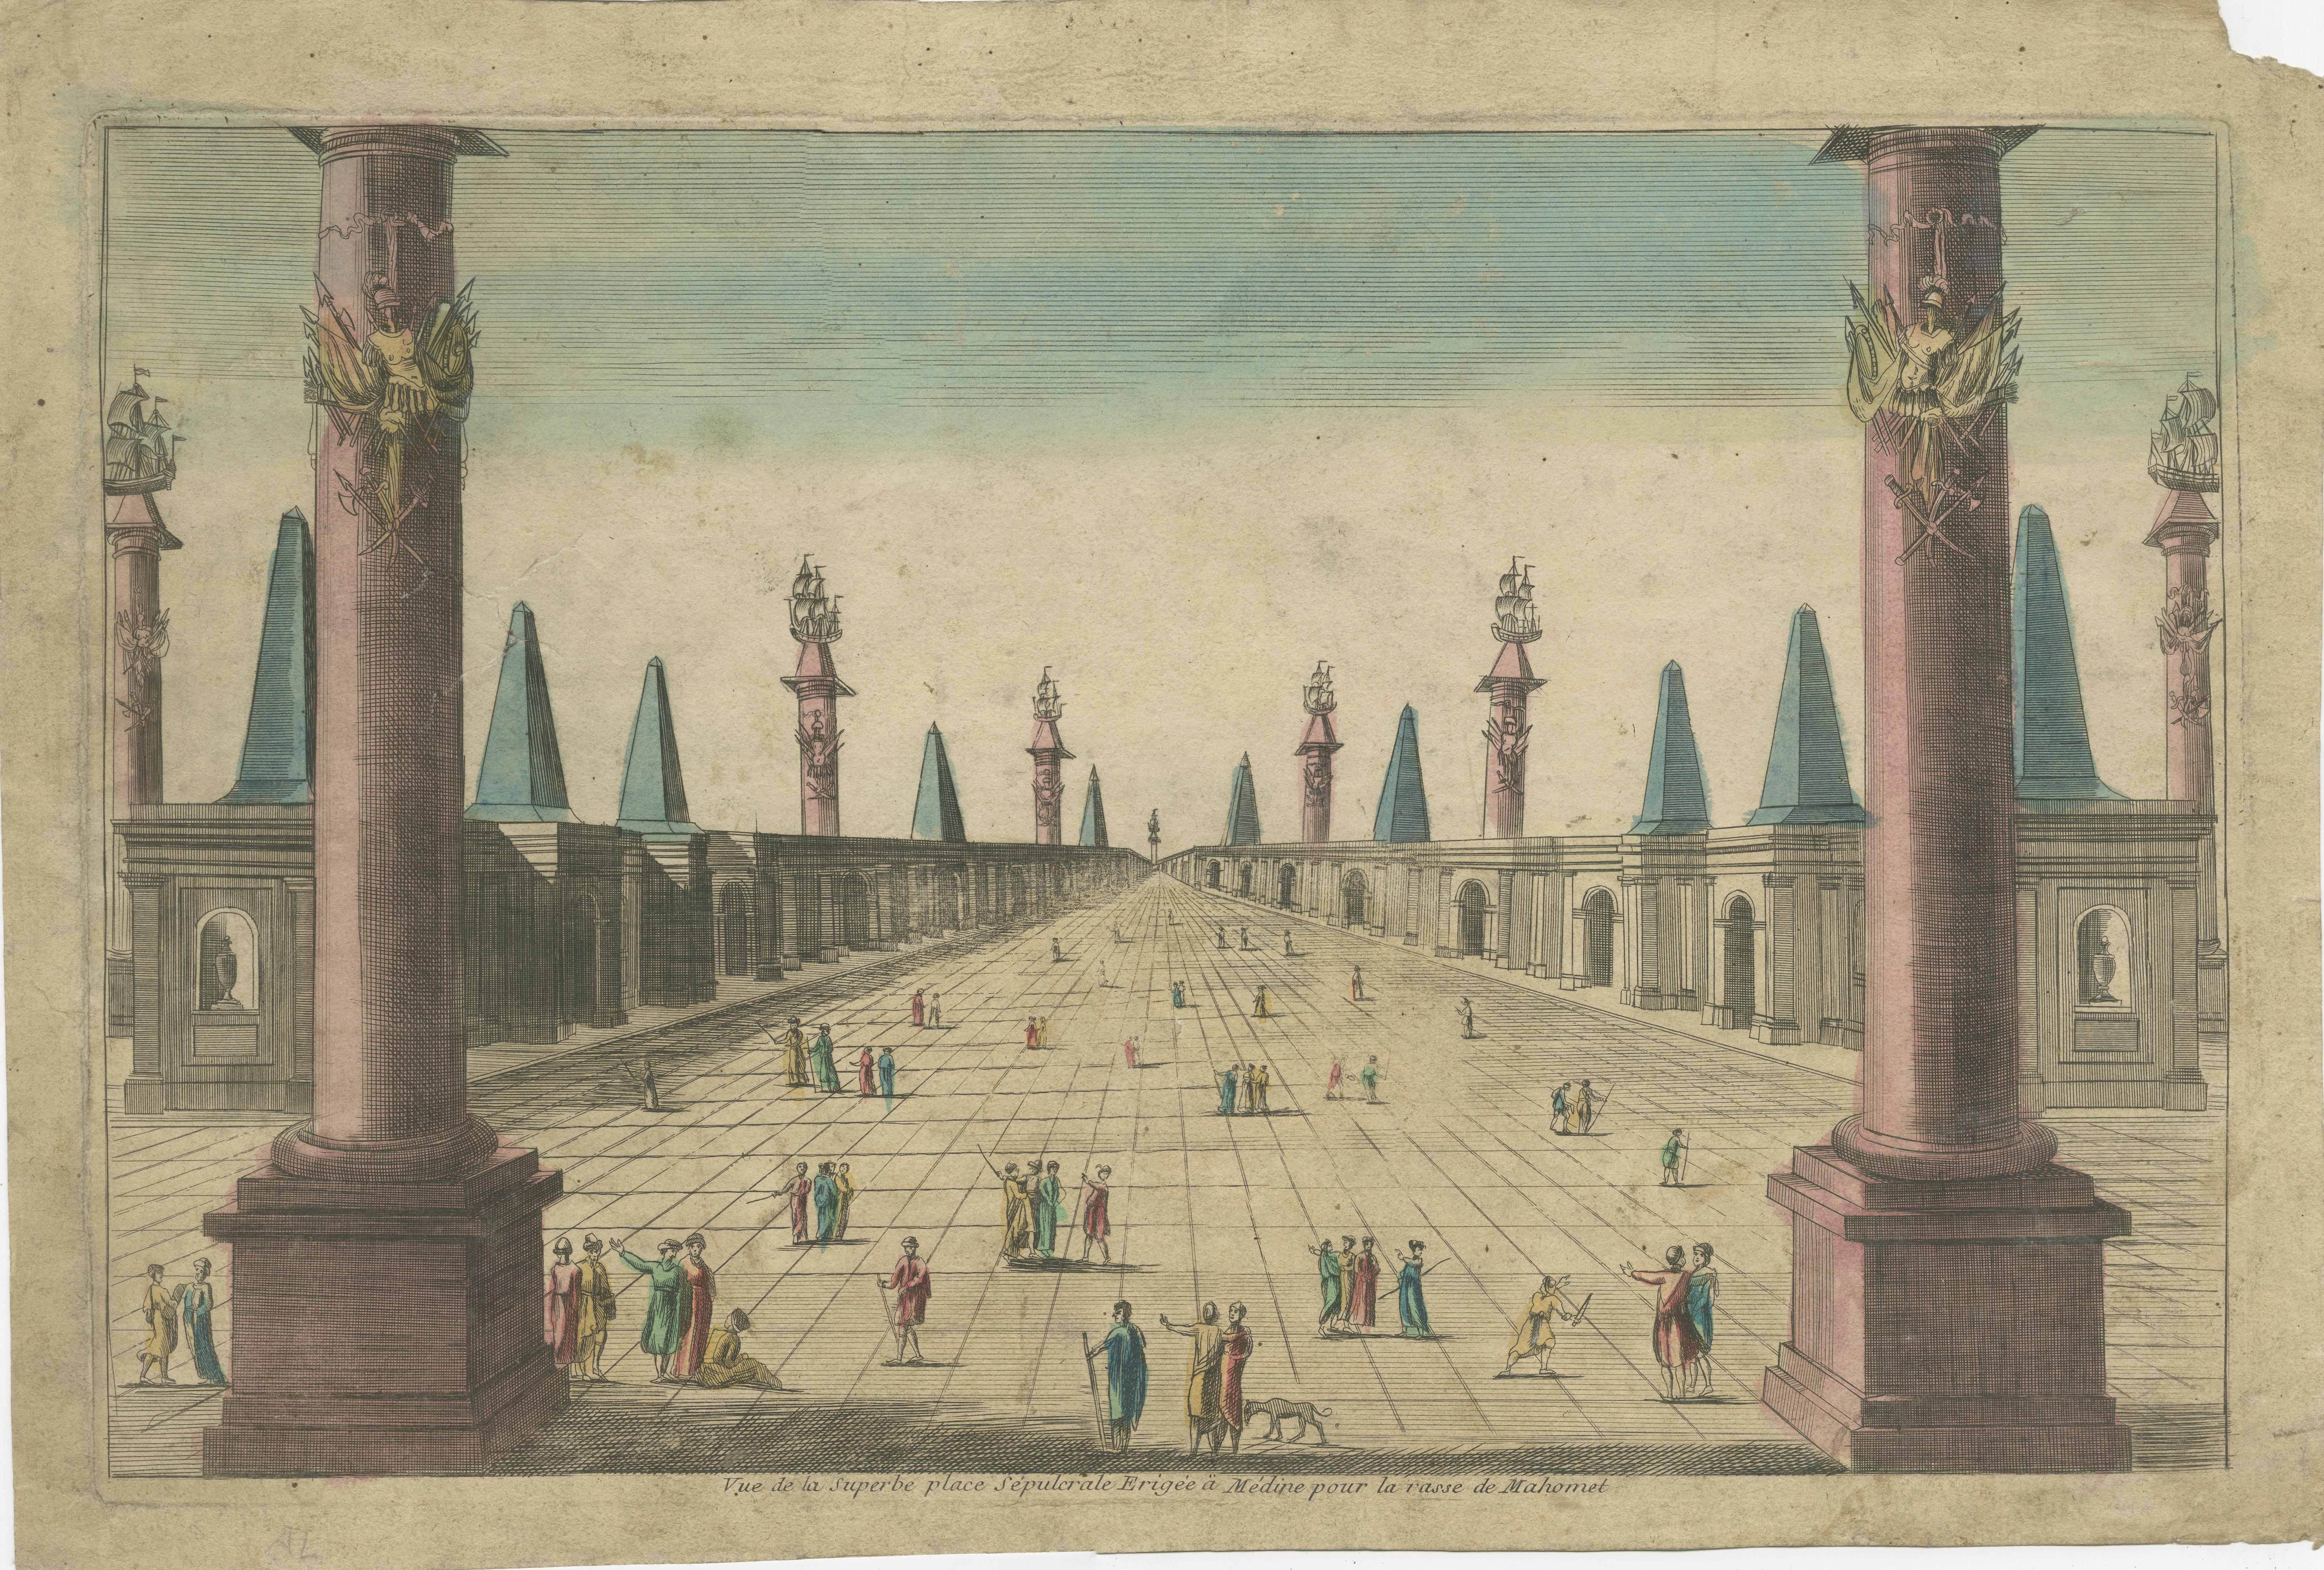 Antique print titled 'Vue de la Superbe place Sepulerale Erigée (..)'. View of the Prophet's Mosque or Al-Masjid an-Nabawī in Medina. This is an optical print, also called 'vue optique' or 'vue d'optique', which were made to be viewed through a